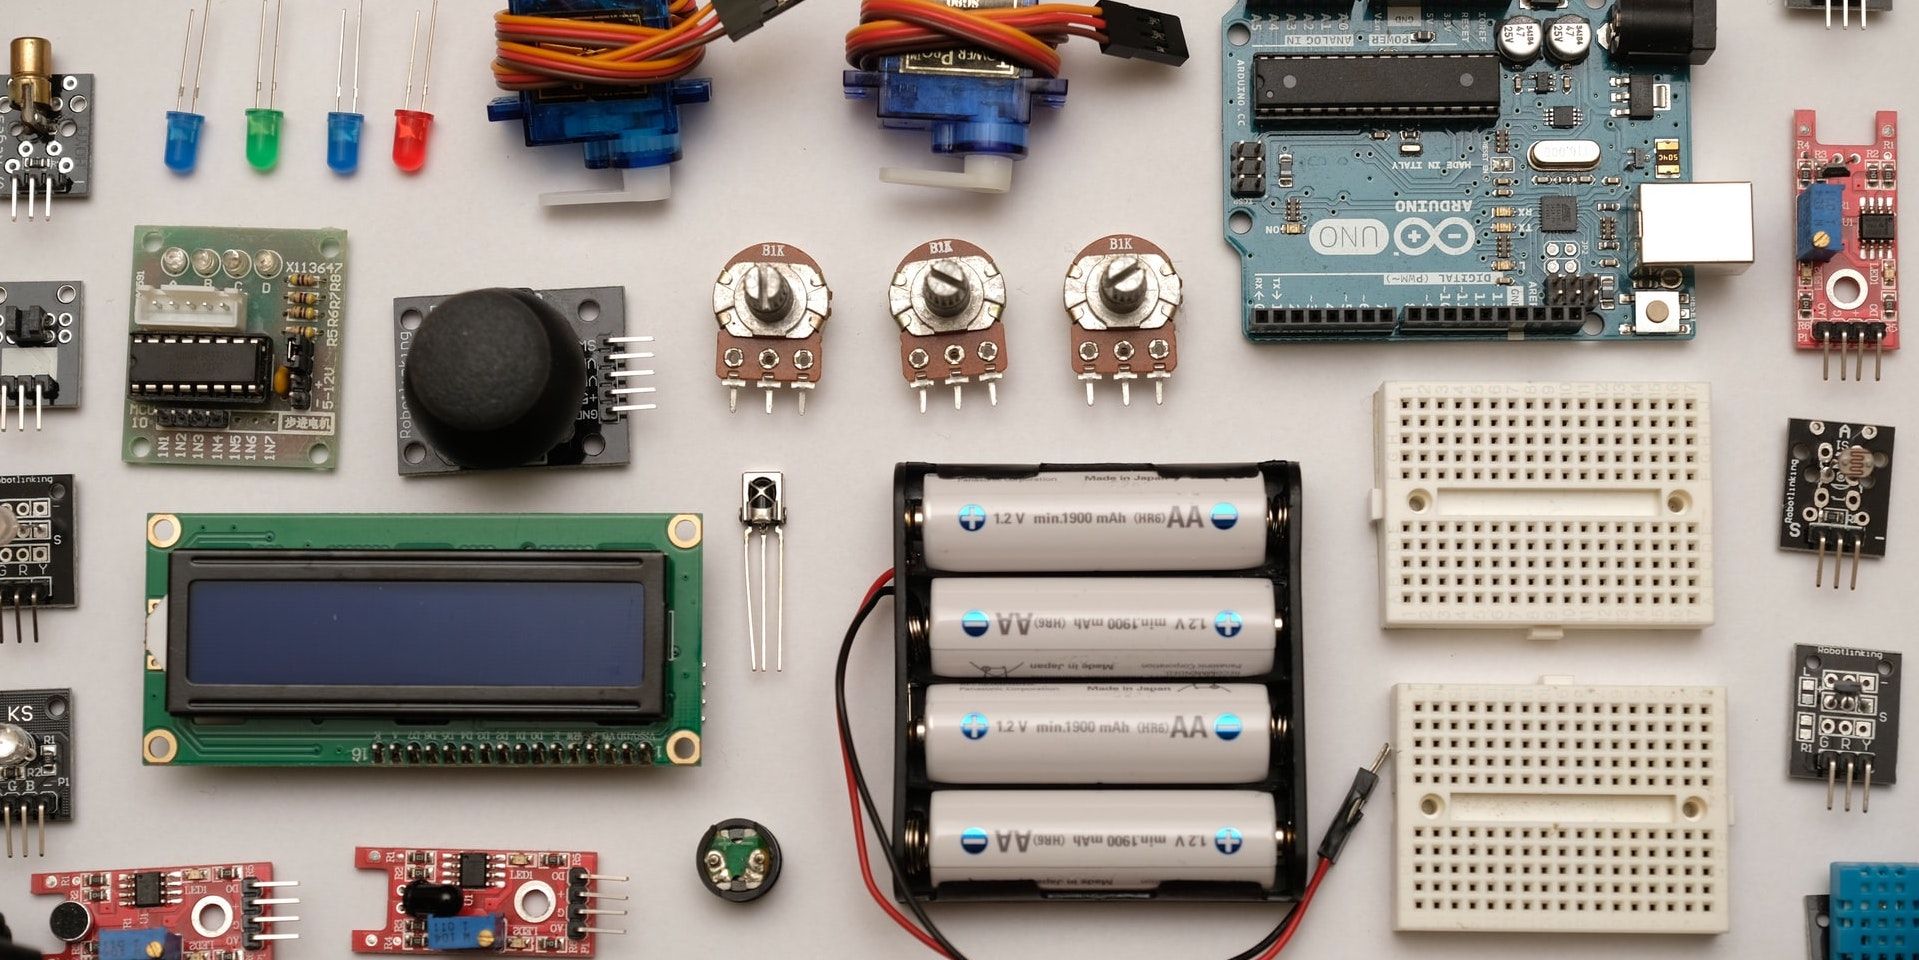 Different types of small electronic parts laid out neatly on a white table